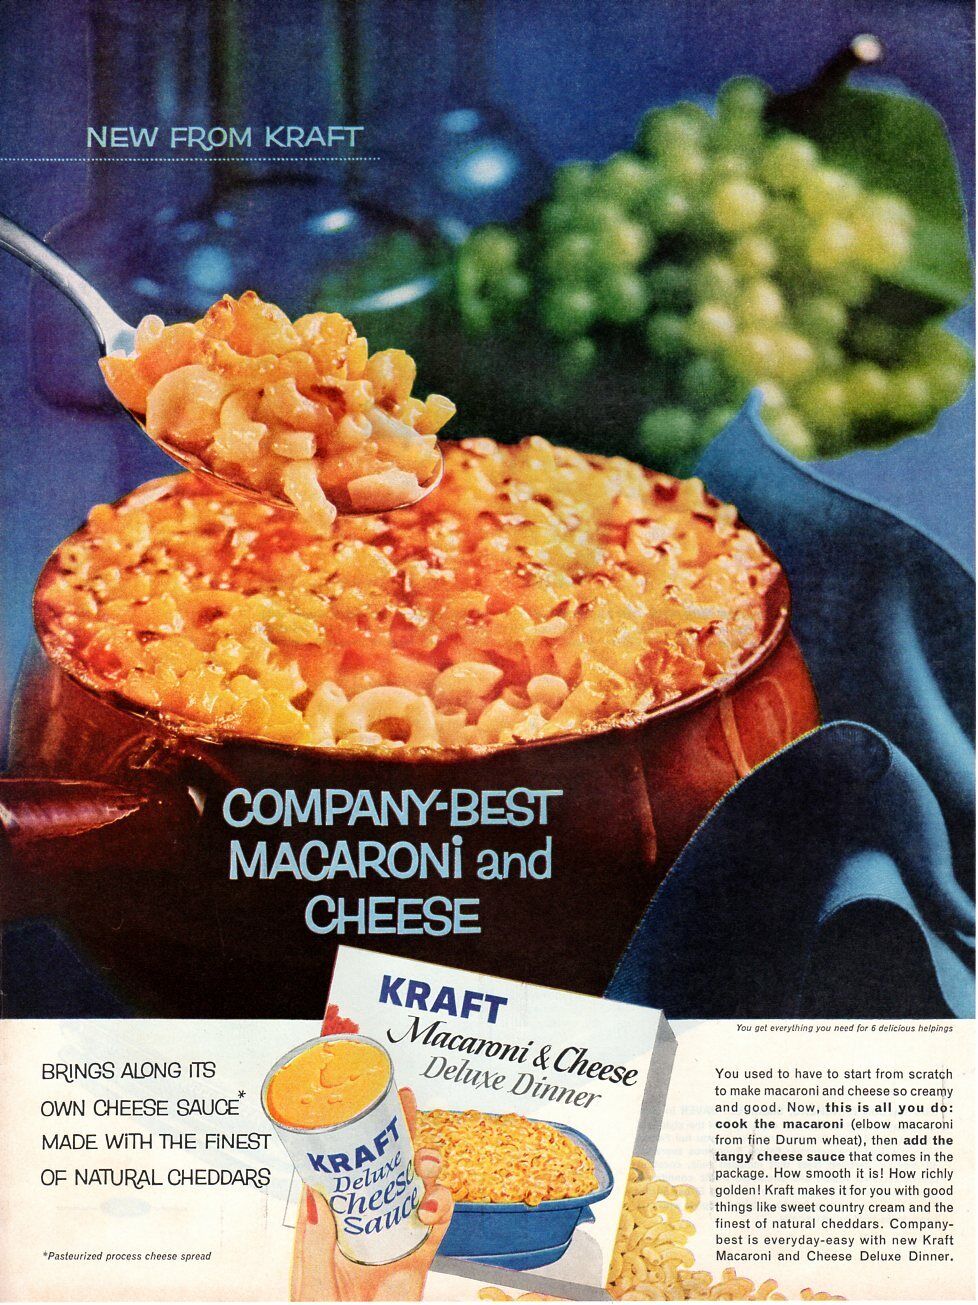 kraft mac and cheese vintage - New From Kraft CompanyBest Macaroni and Cheese Kraft Macaroni & Cheese Deluxe Dinner Brings Along Its Own Cheese Sauce Made With The Finest Of Natural Cheddars Pasteurized process cheese spread Kraft Deluxe Chees Sauce You g